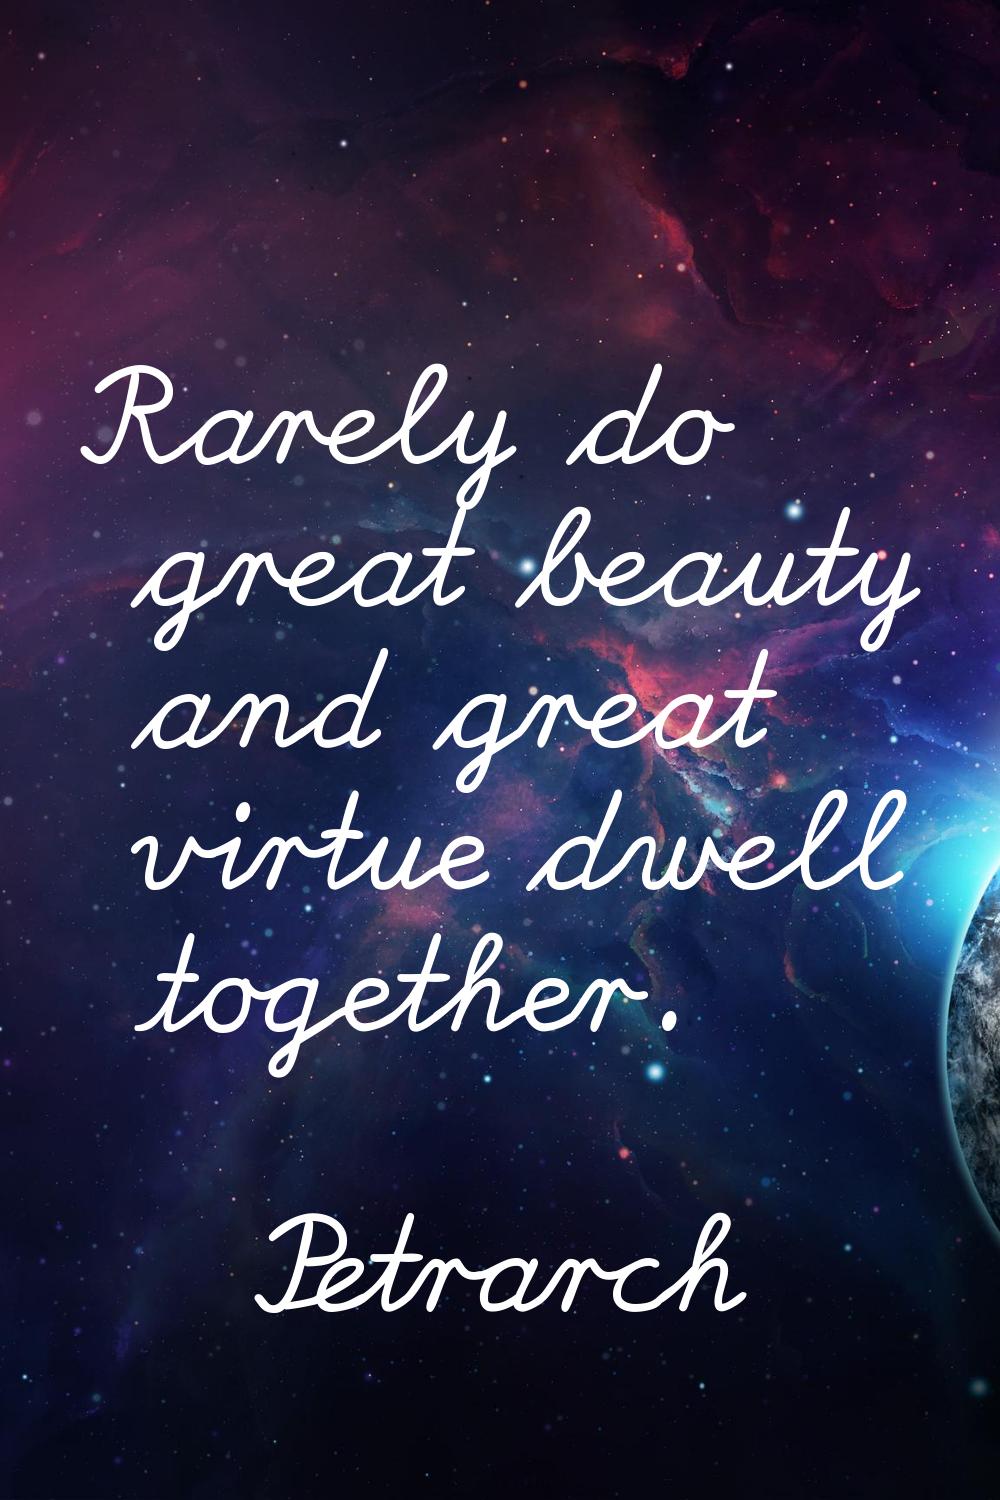 Rarely do great beauty and great virtue dwell together.